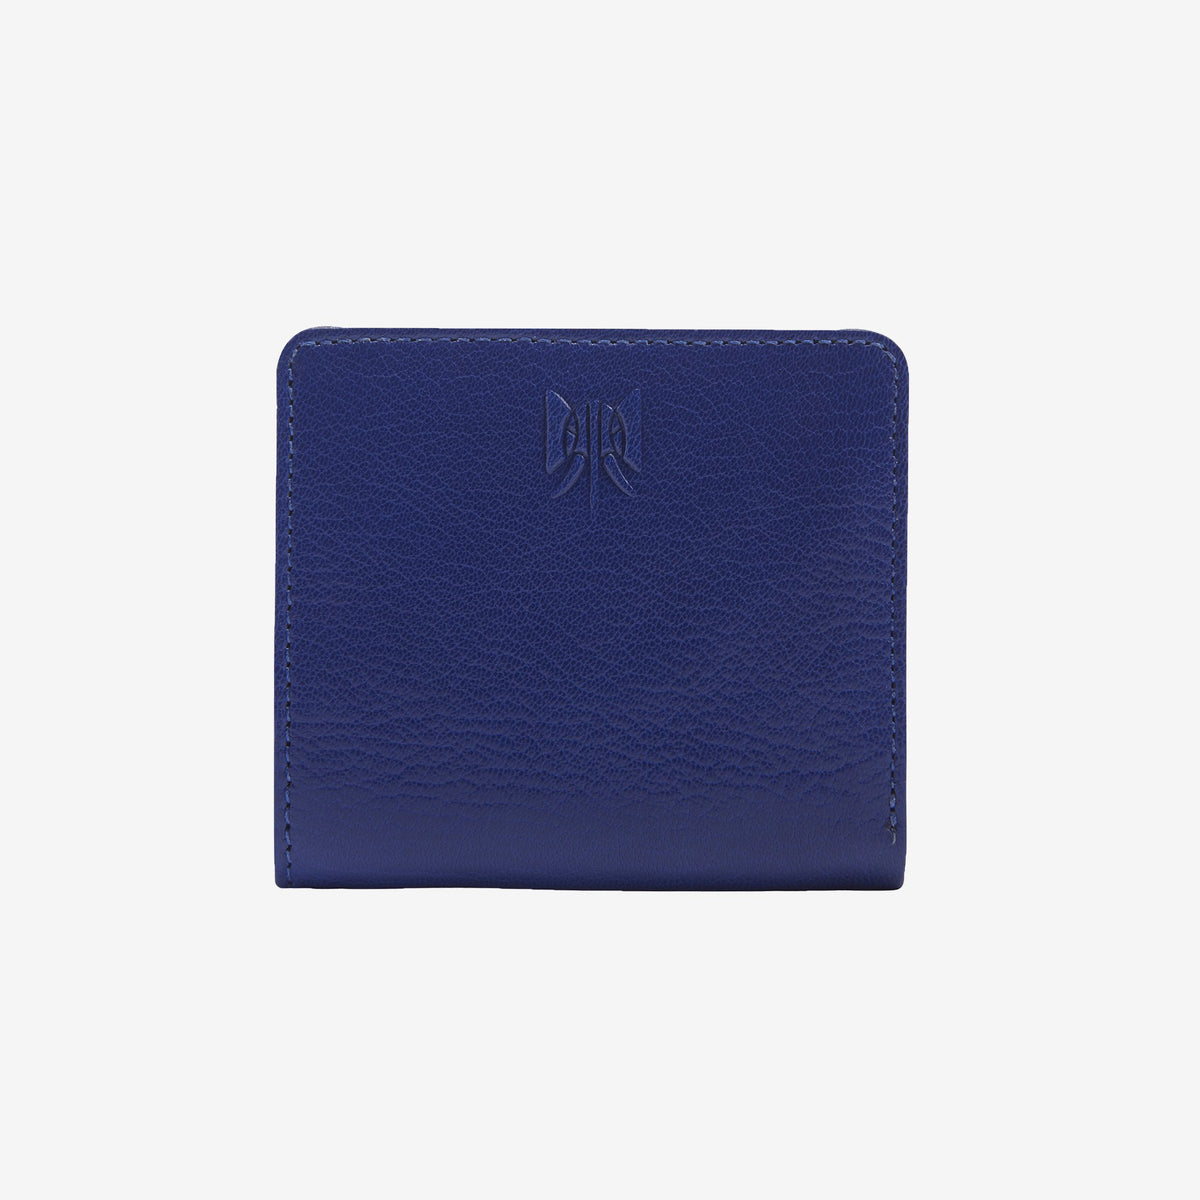 tusk-486-womens-siam-snap-evening-wallet-indigo-and-french-blue-front